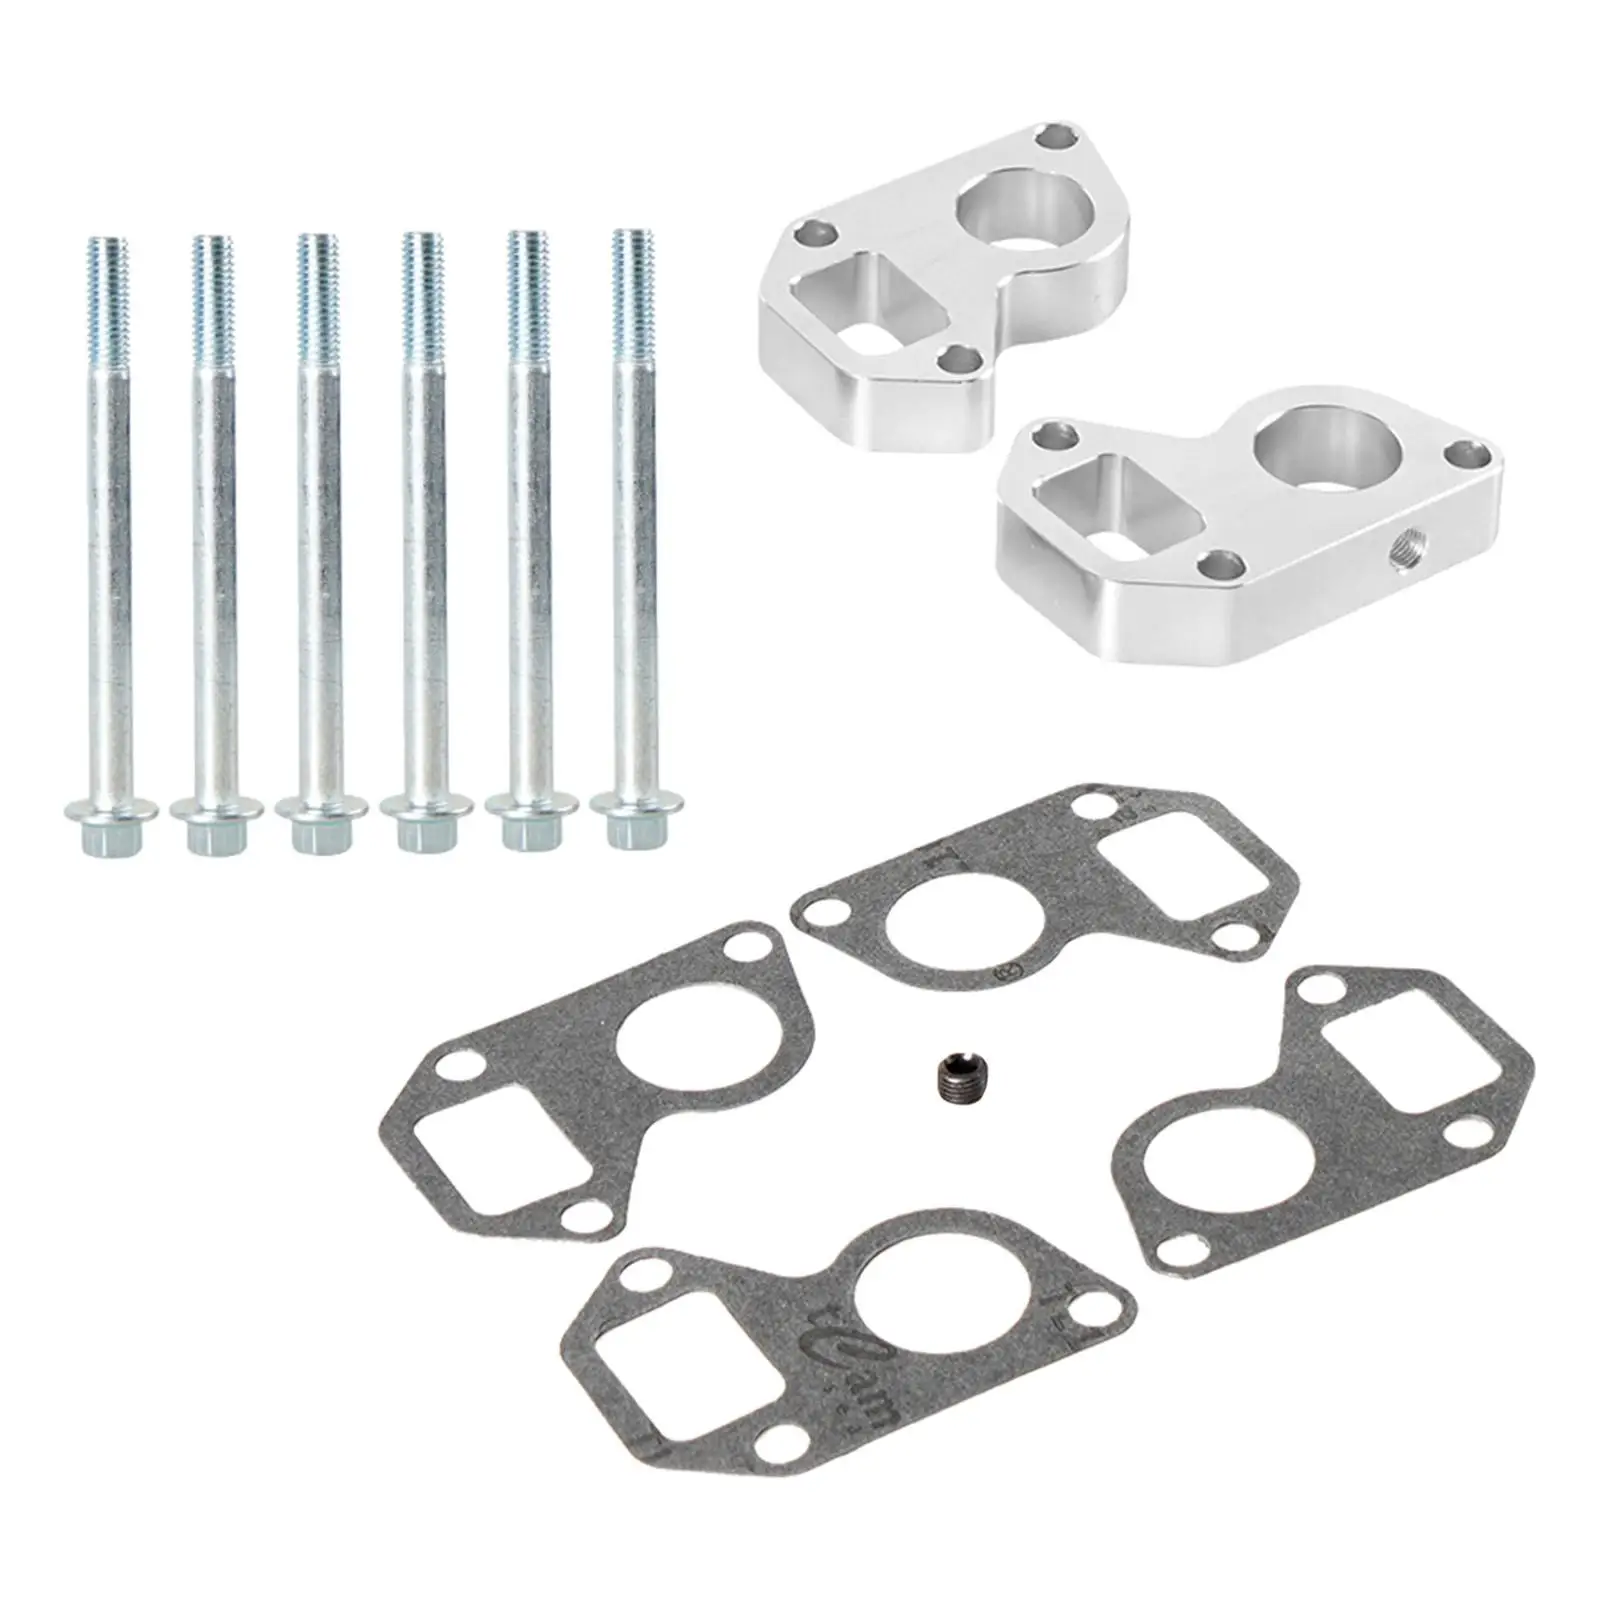 Water Pump Spacer Truck Adapter for Replace Accessories